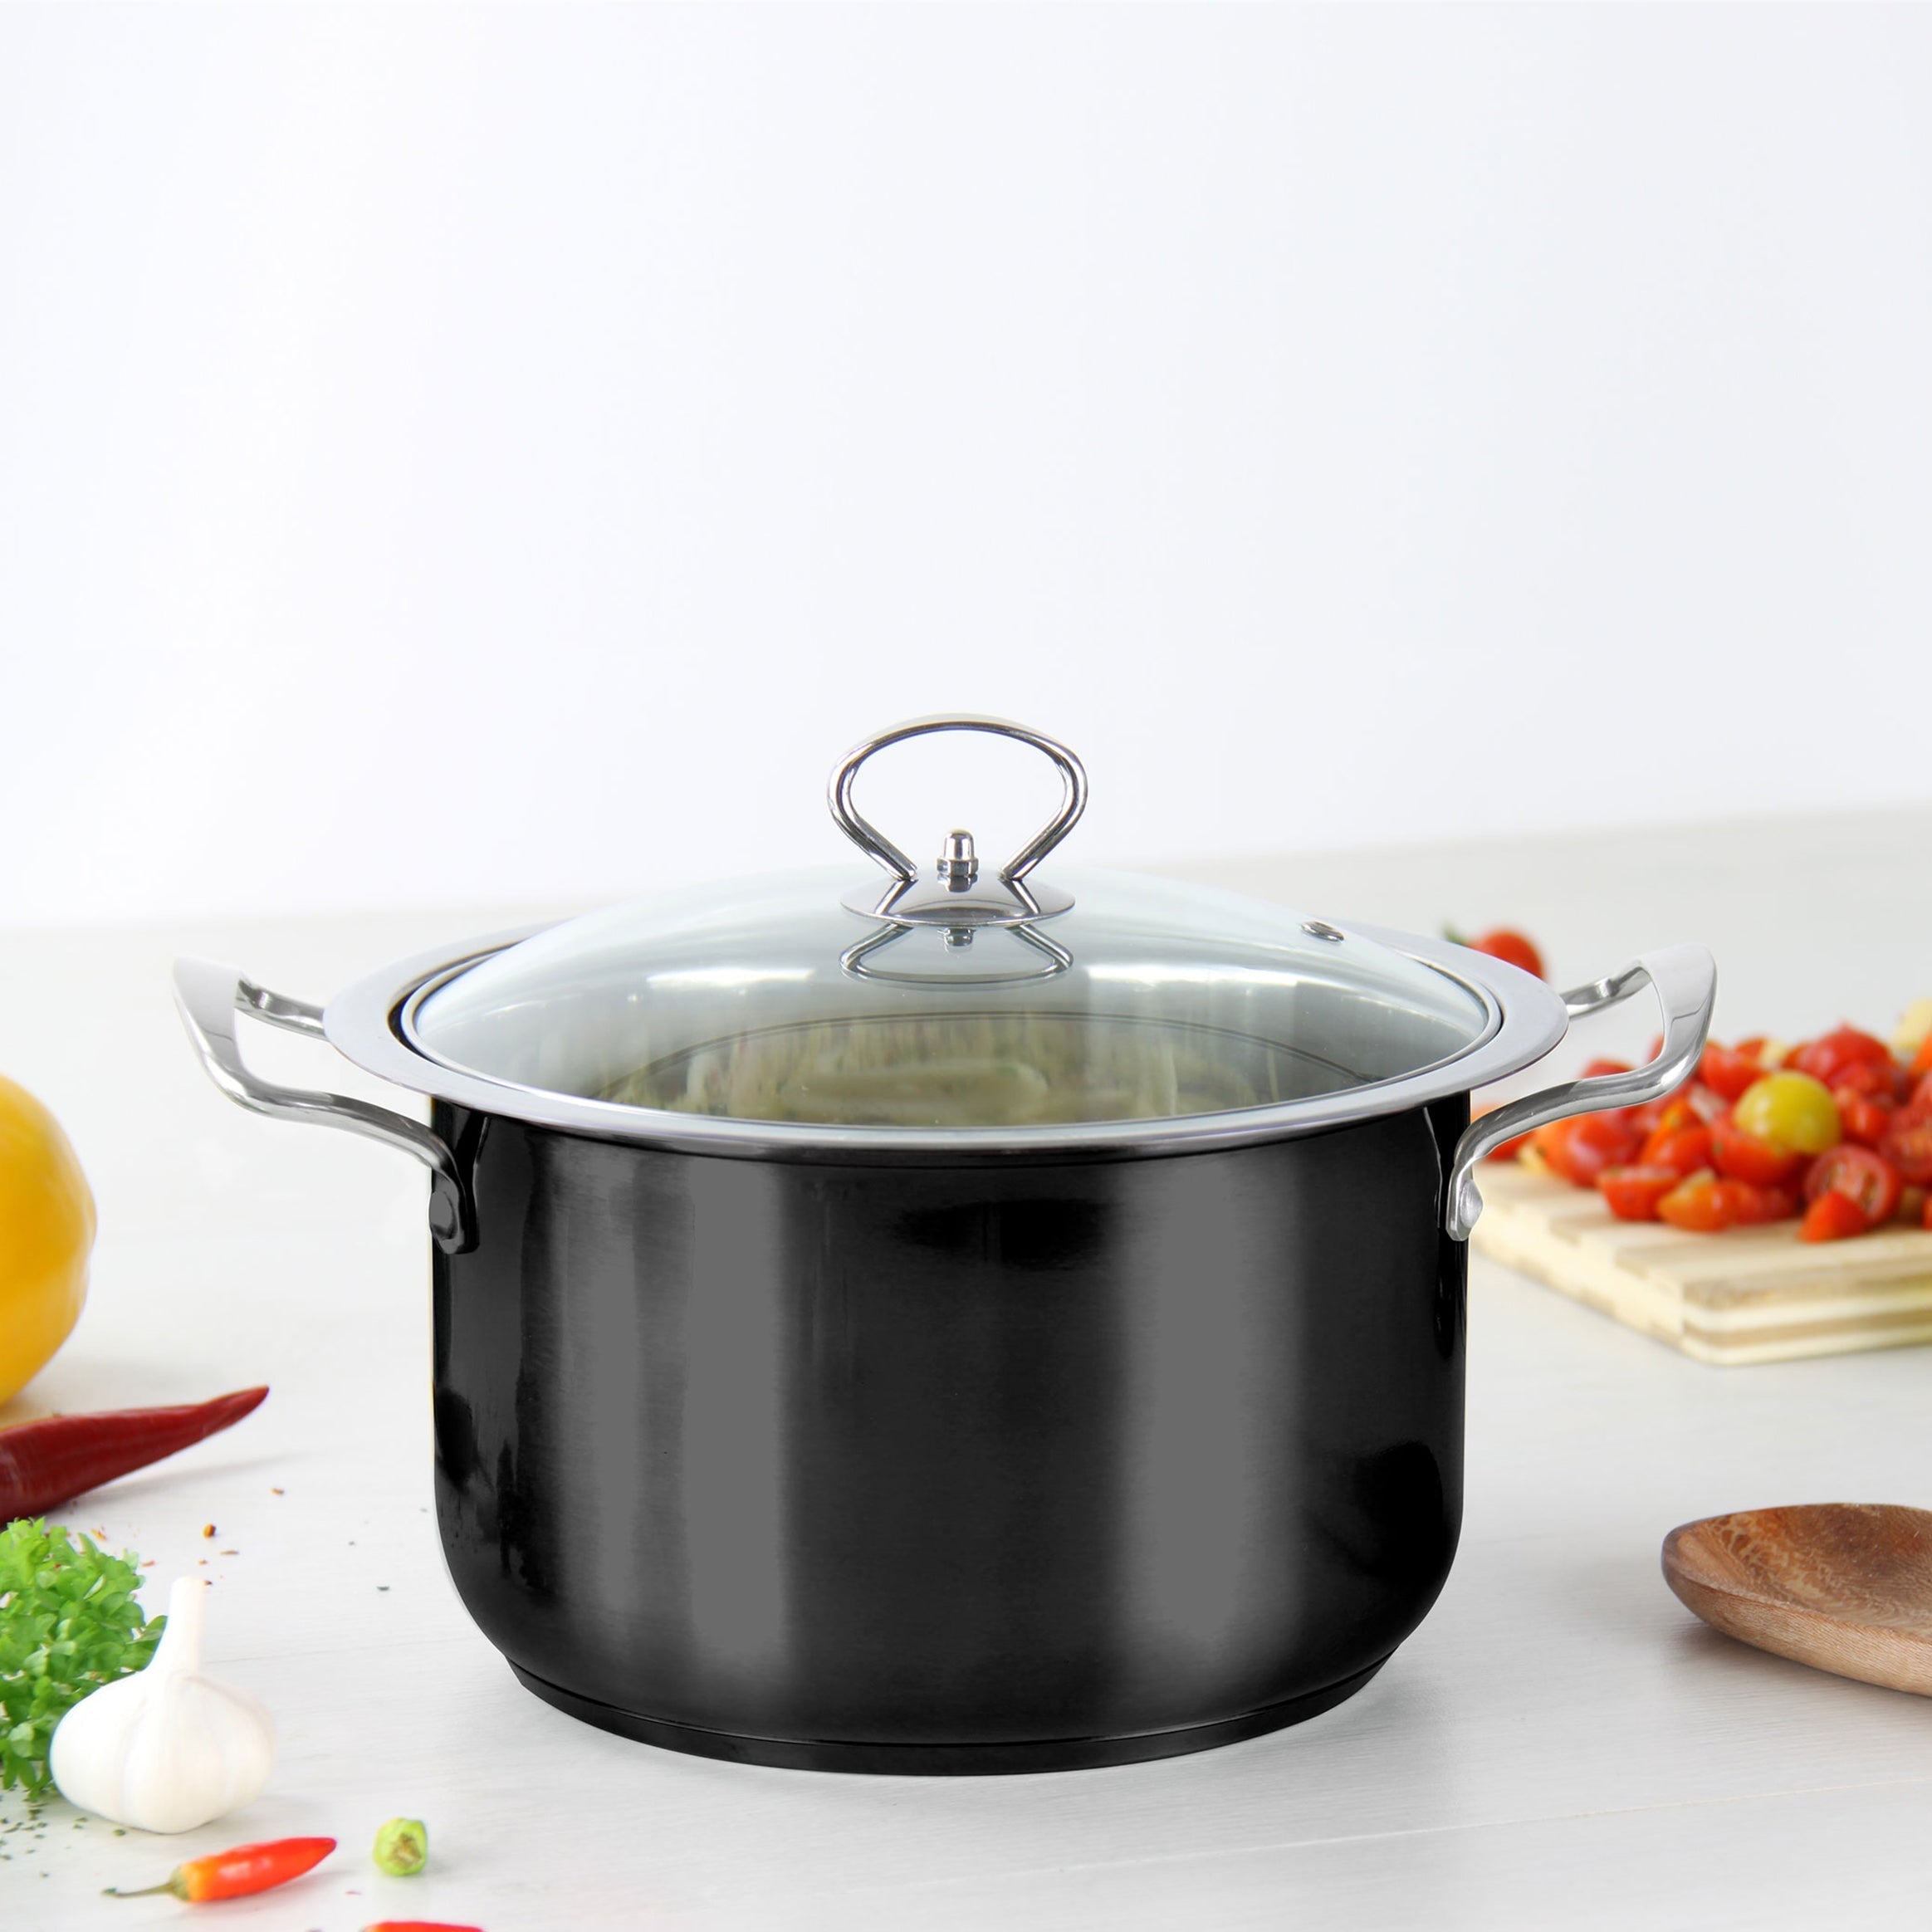 Stainless Steel Stockpot - Induction Base - ONYX - 32cm